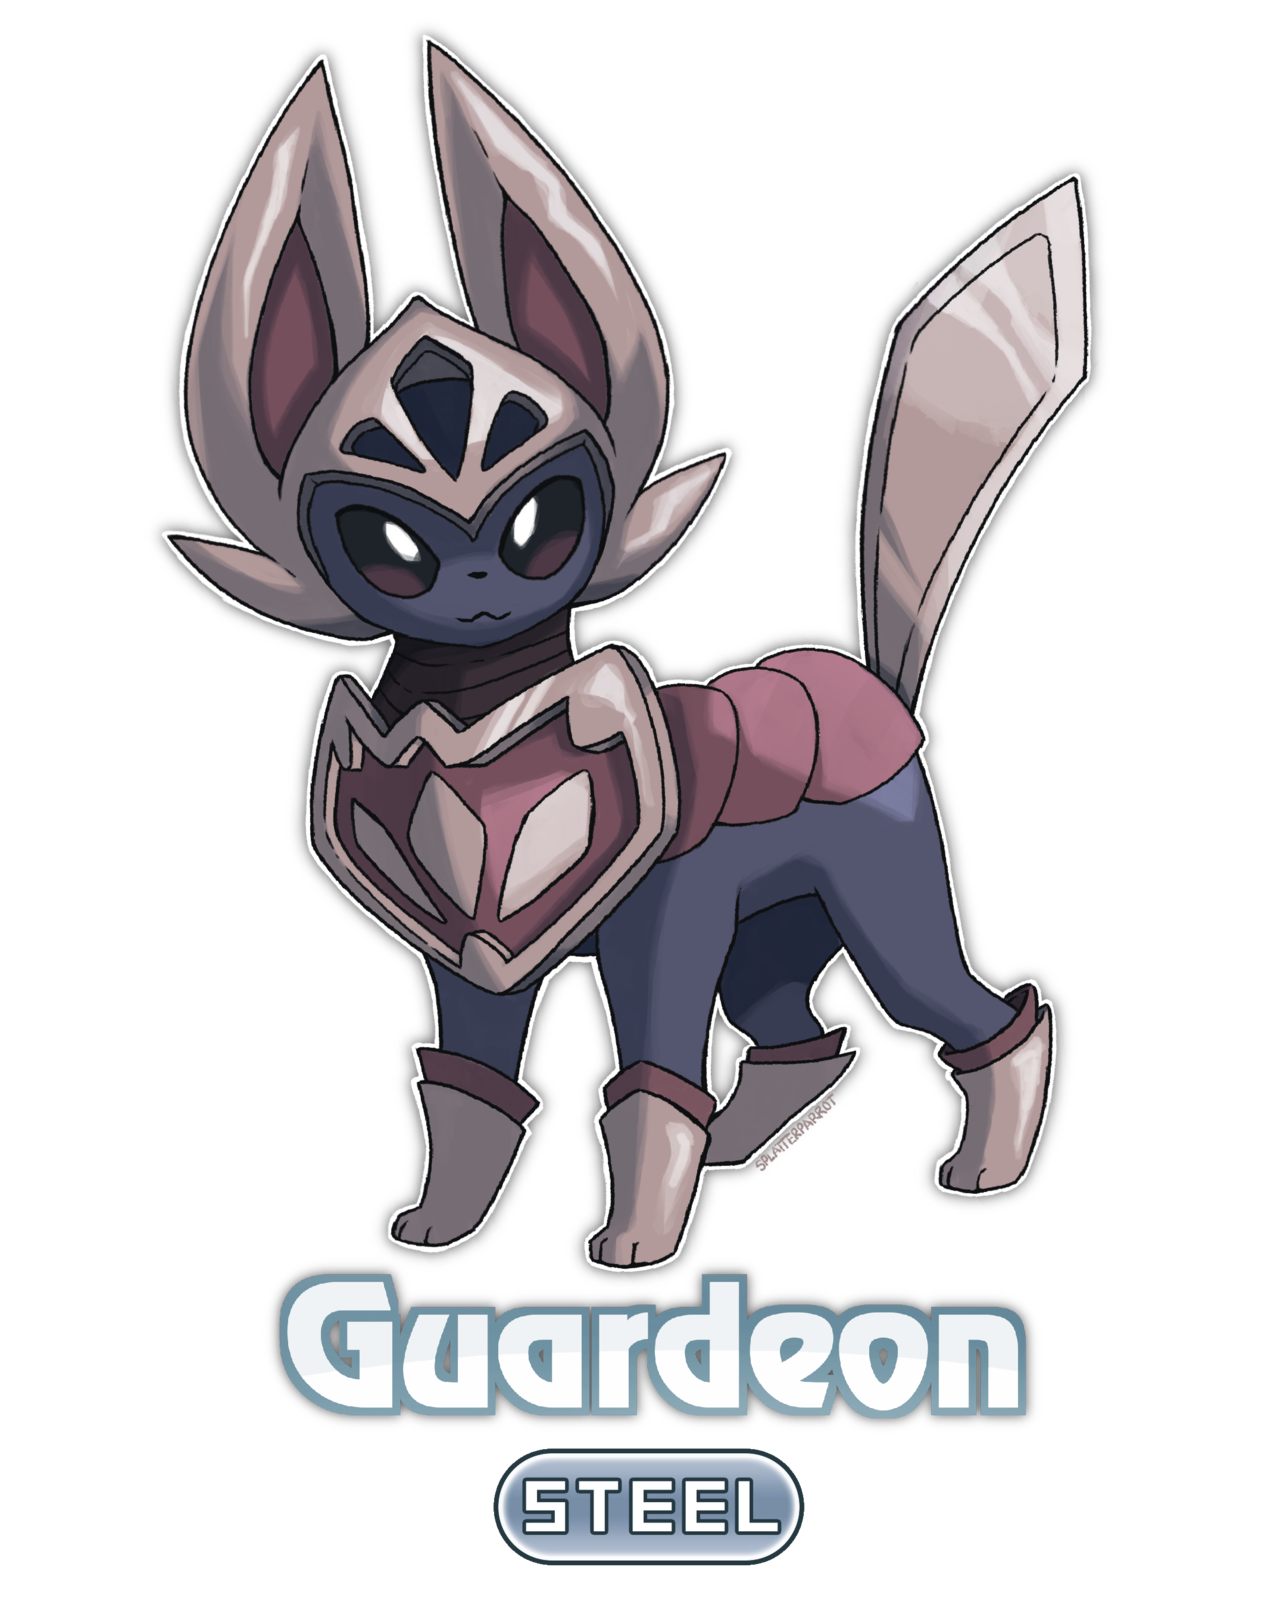 Hi There Introducing The New Armour Pokemon Guardeon I